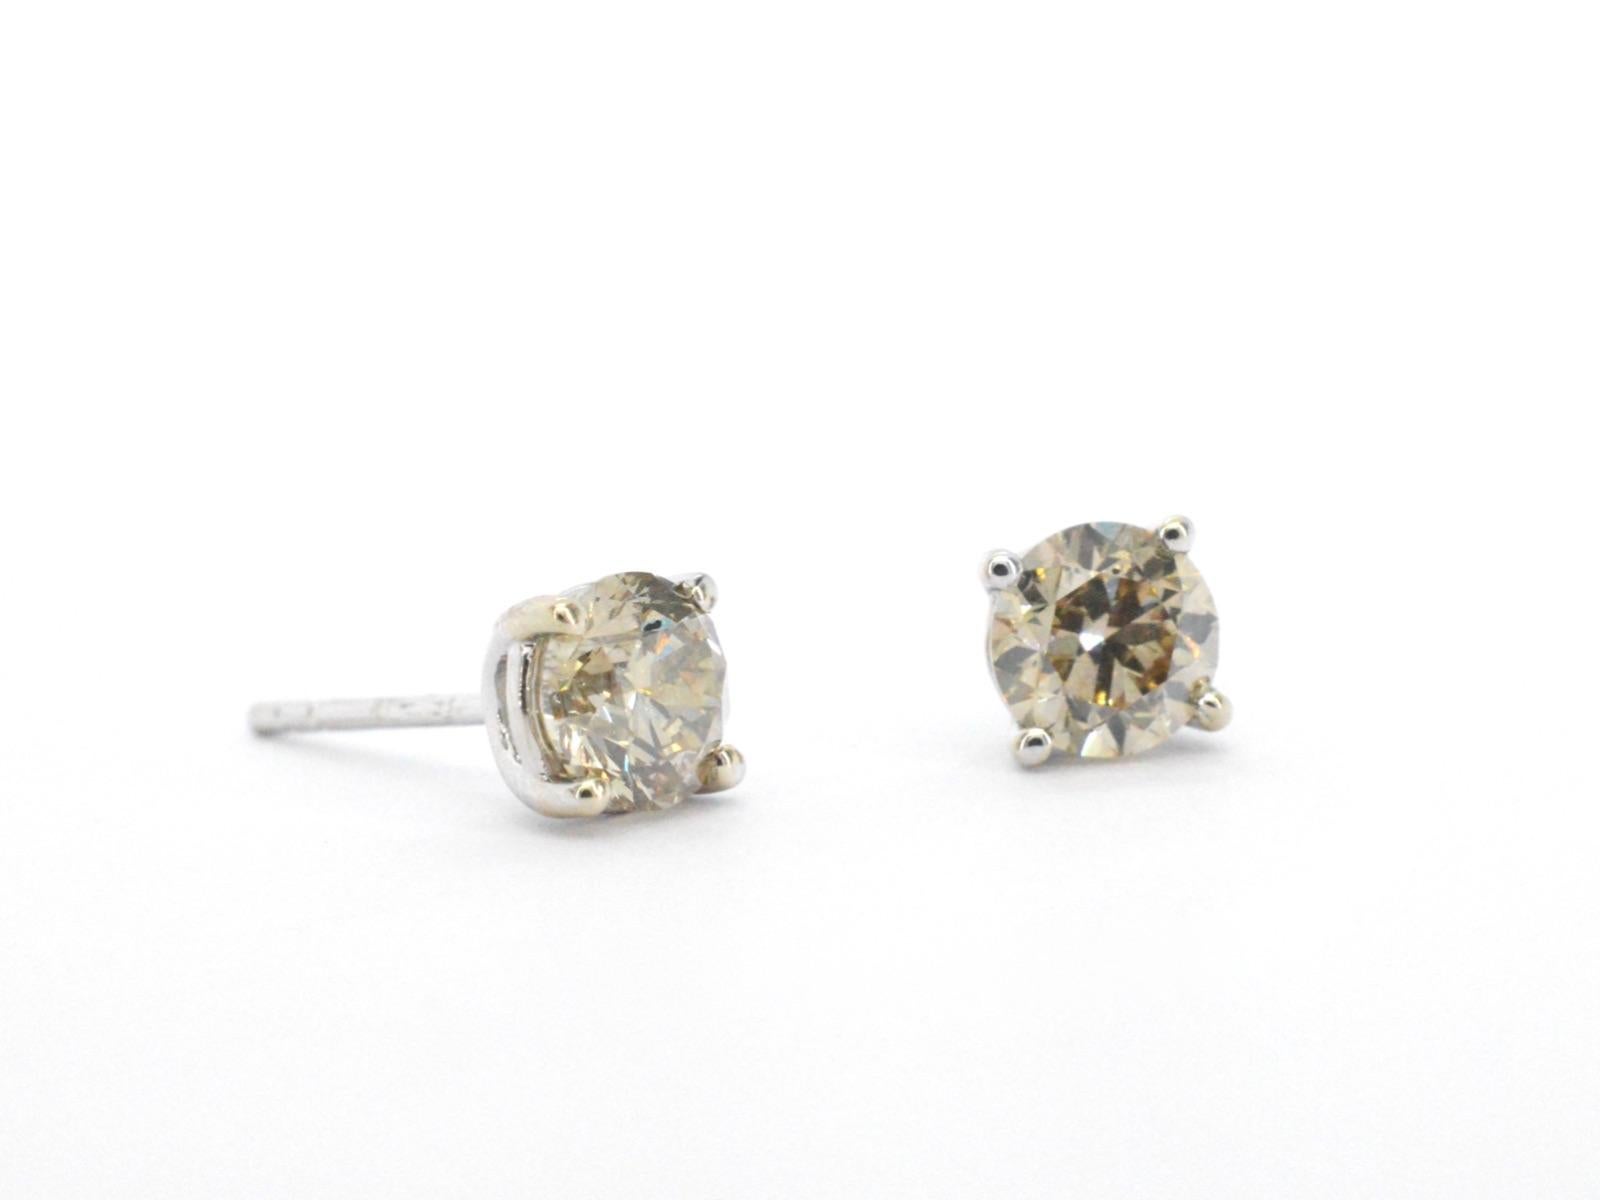 Gold Solitaire Earrings with Champagne Diamond For Sale 2